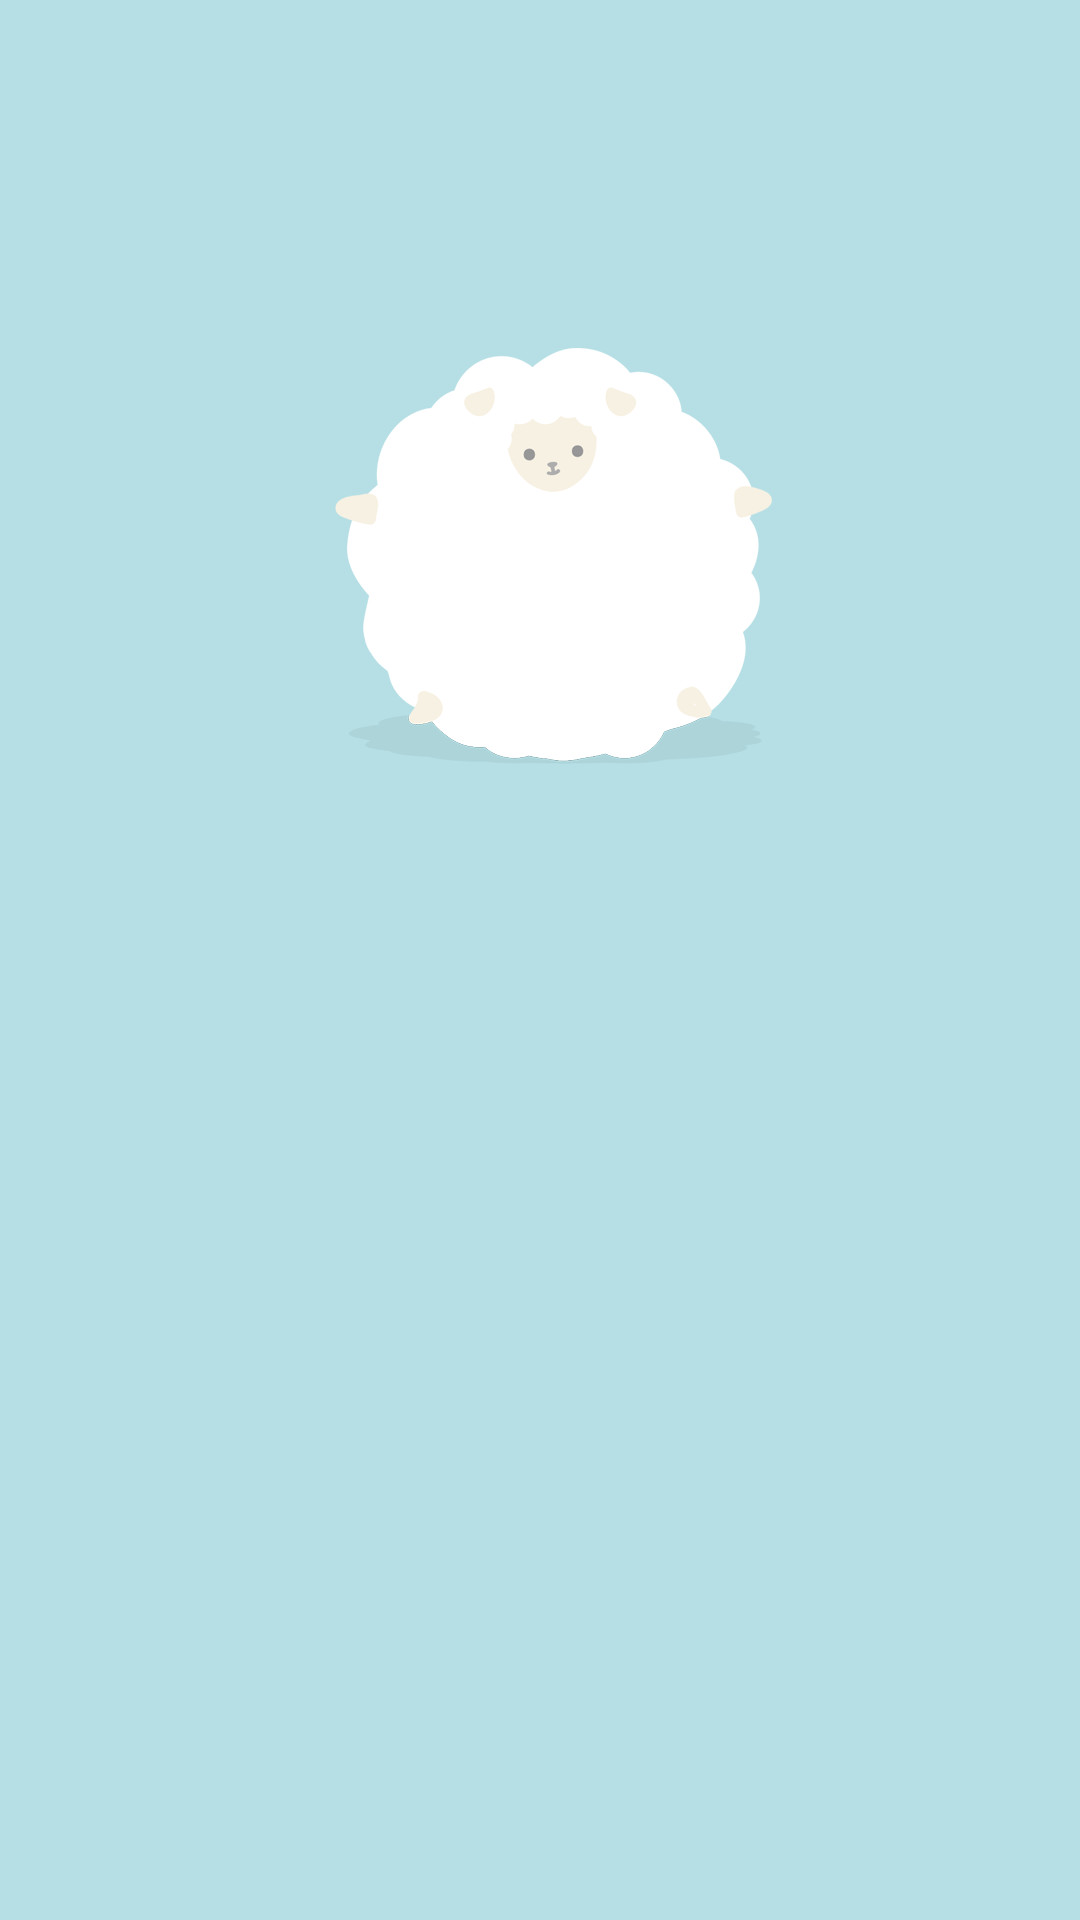 1080x1920 0022 mobilewap info:  funny sheep animated mobile wallpaper